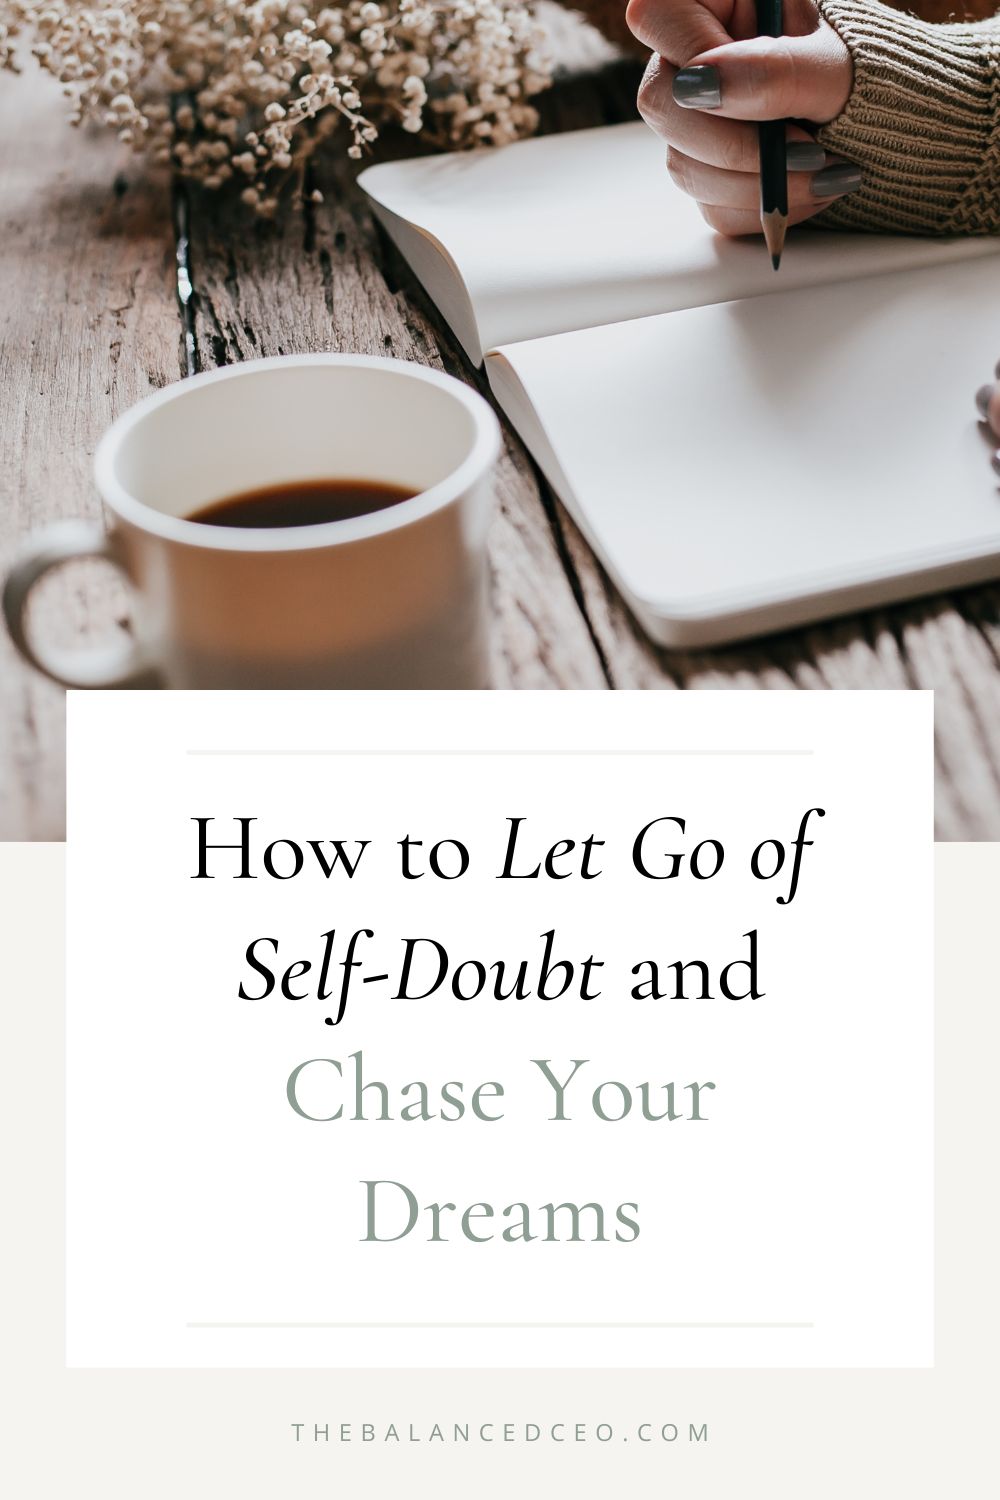 How to Let Go of Self-Doubt and Chase Your Dreams